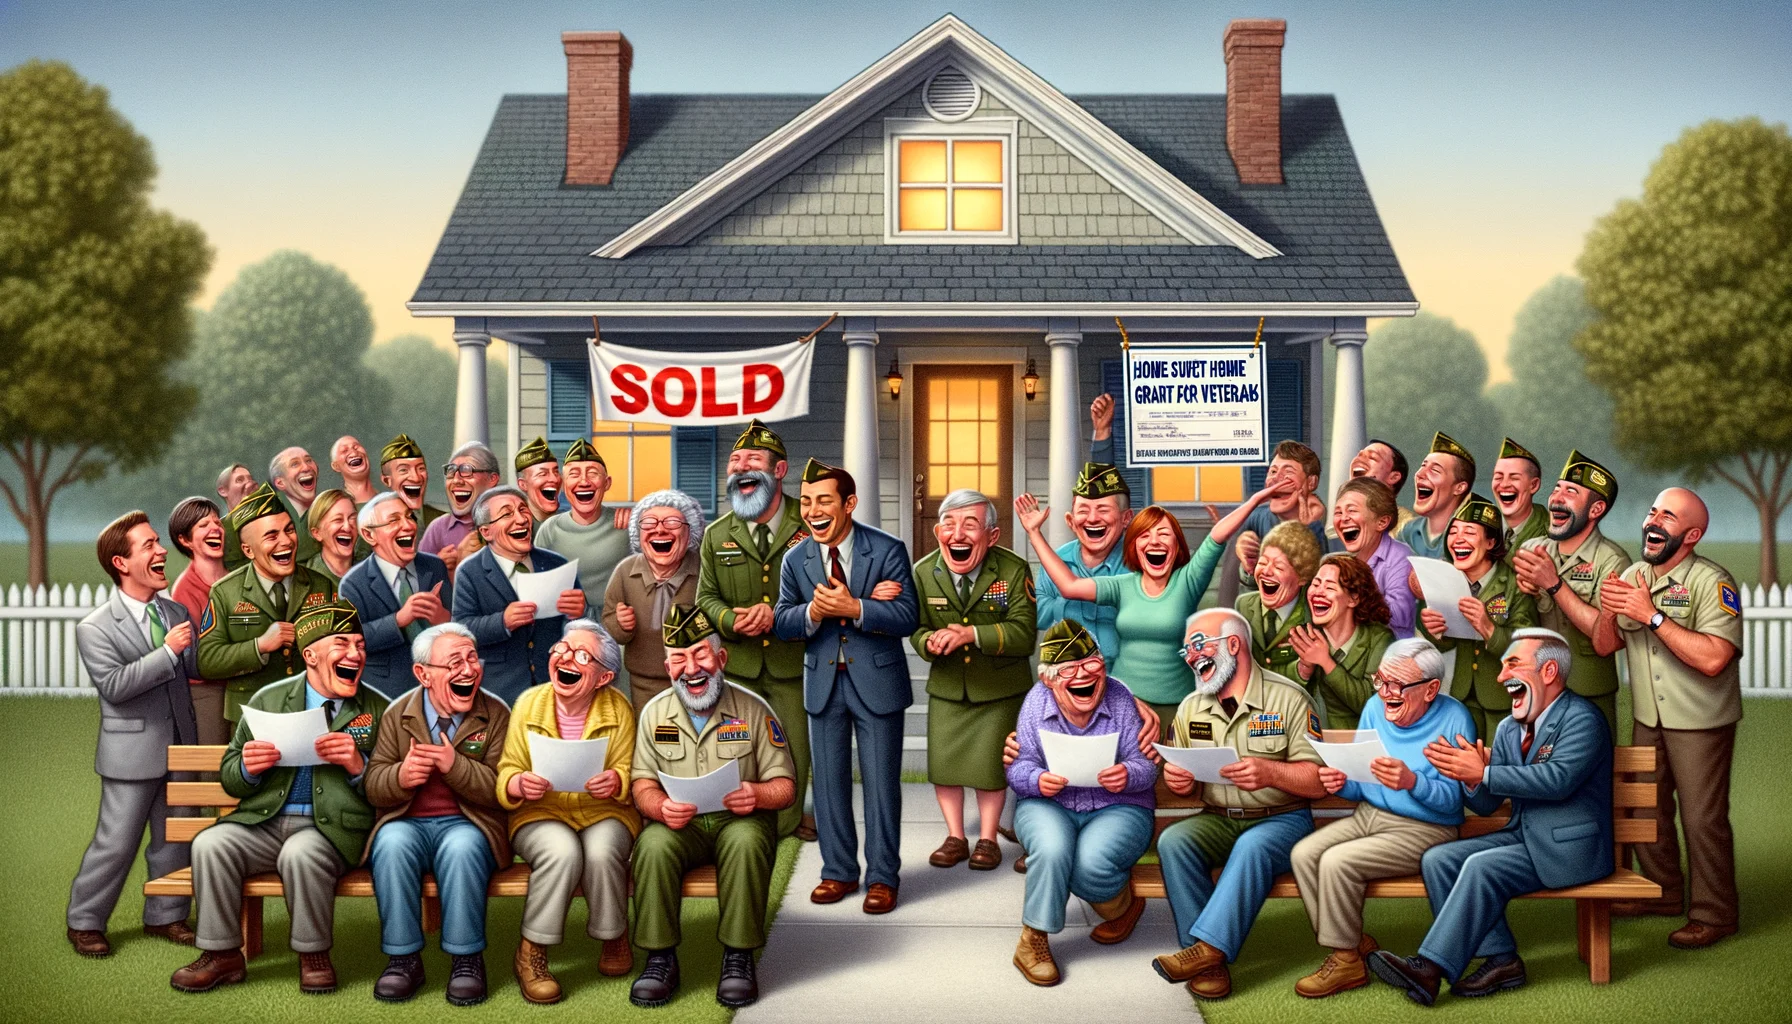 Envision a humorous yet realistic scenario depicting the ideal situation for home buying grants for veterans. In the middle of the scene, there's a quaint and charming house with a 'Sold' sign out front. A group of veterans, of diverse races and genders, are gathered together, cheerfully laughing and celebrating outside the house. Their happiness is tangible, each holding the grant papers in their hands, their faces lit up with pure joy. A large banner is strung across the house with the words 'Home sweet home grant for veterans'. In the periphery, a real estate agent is seen chuckling, overwhelmed by the veterans' lively celebration.